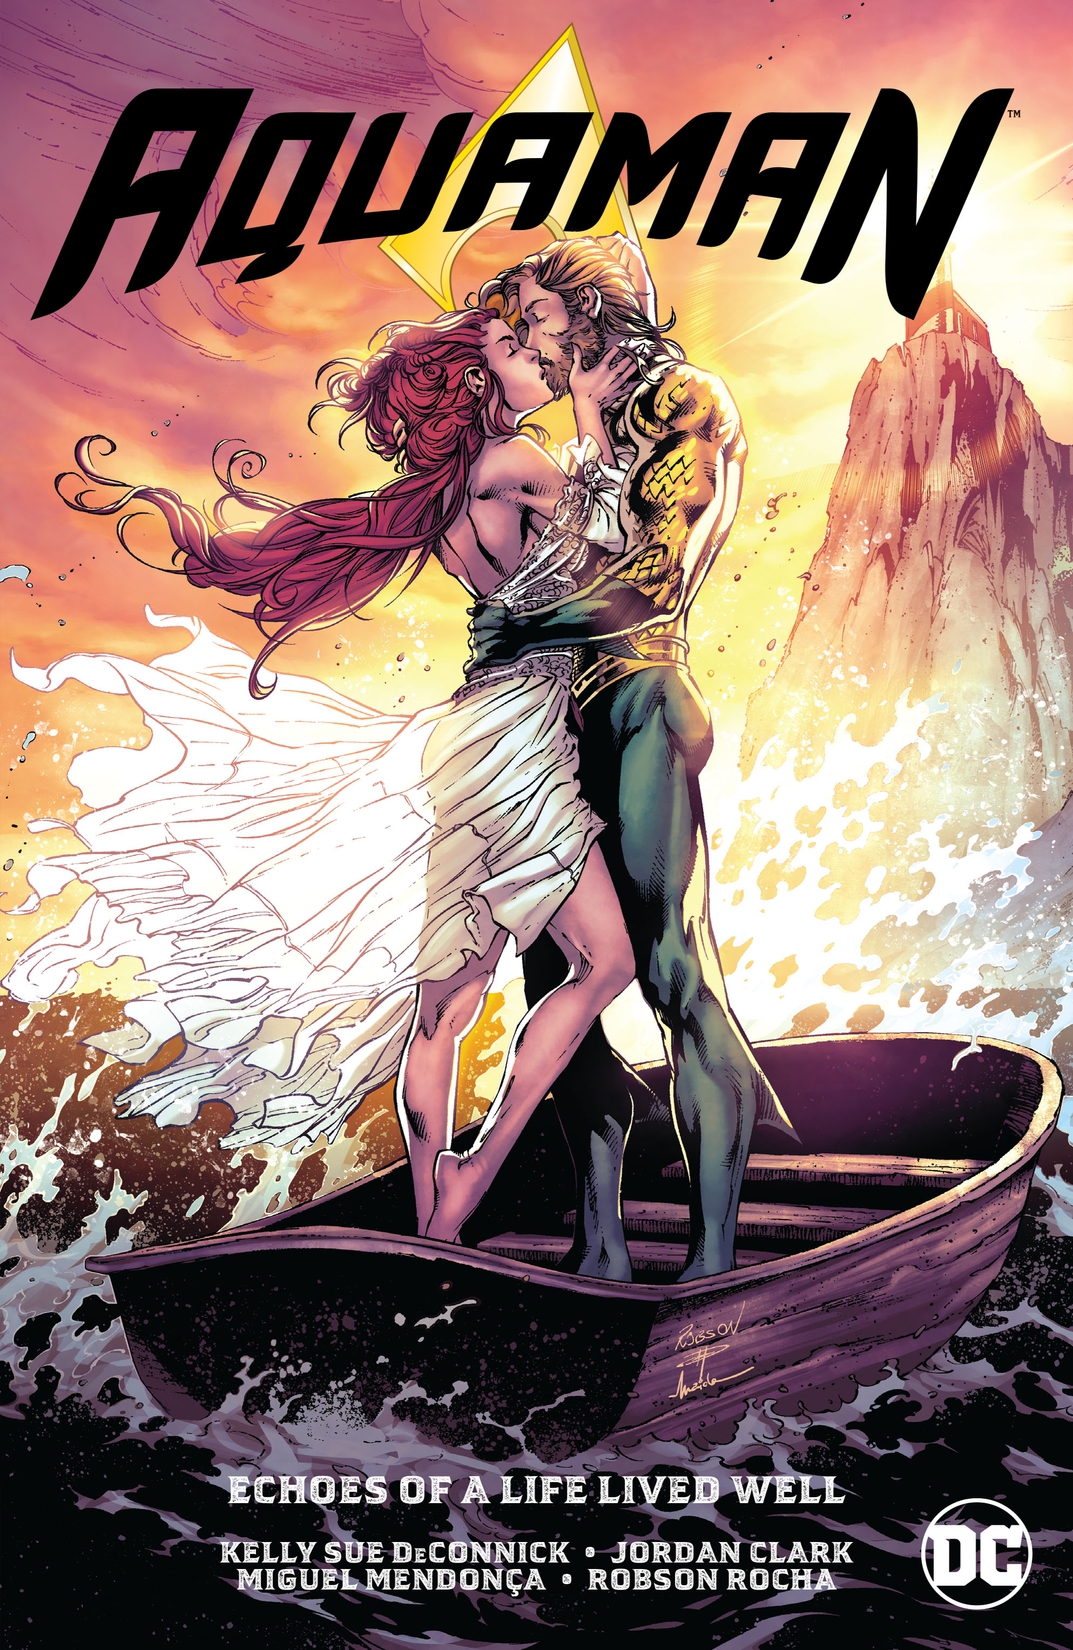 Aquaman Vol. 4: Echoes of a Life Lived Well preview images